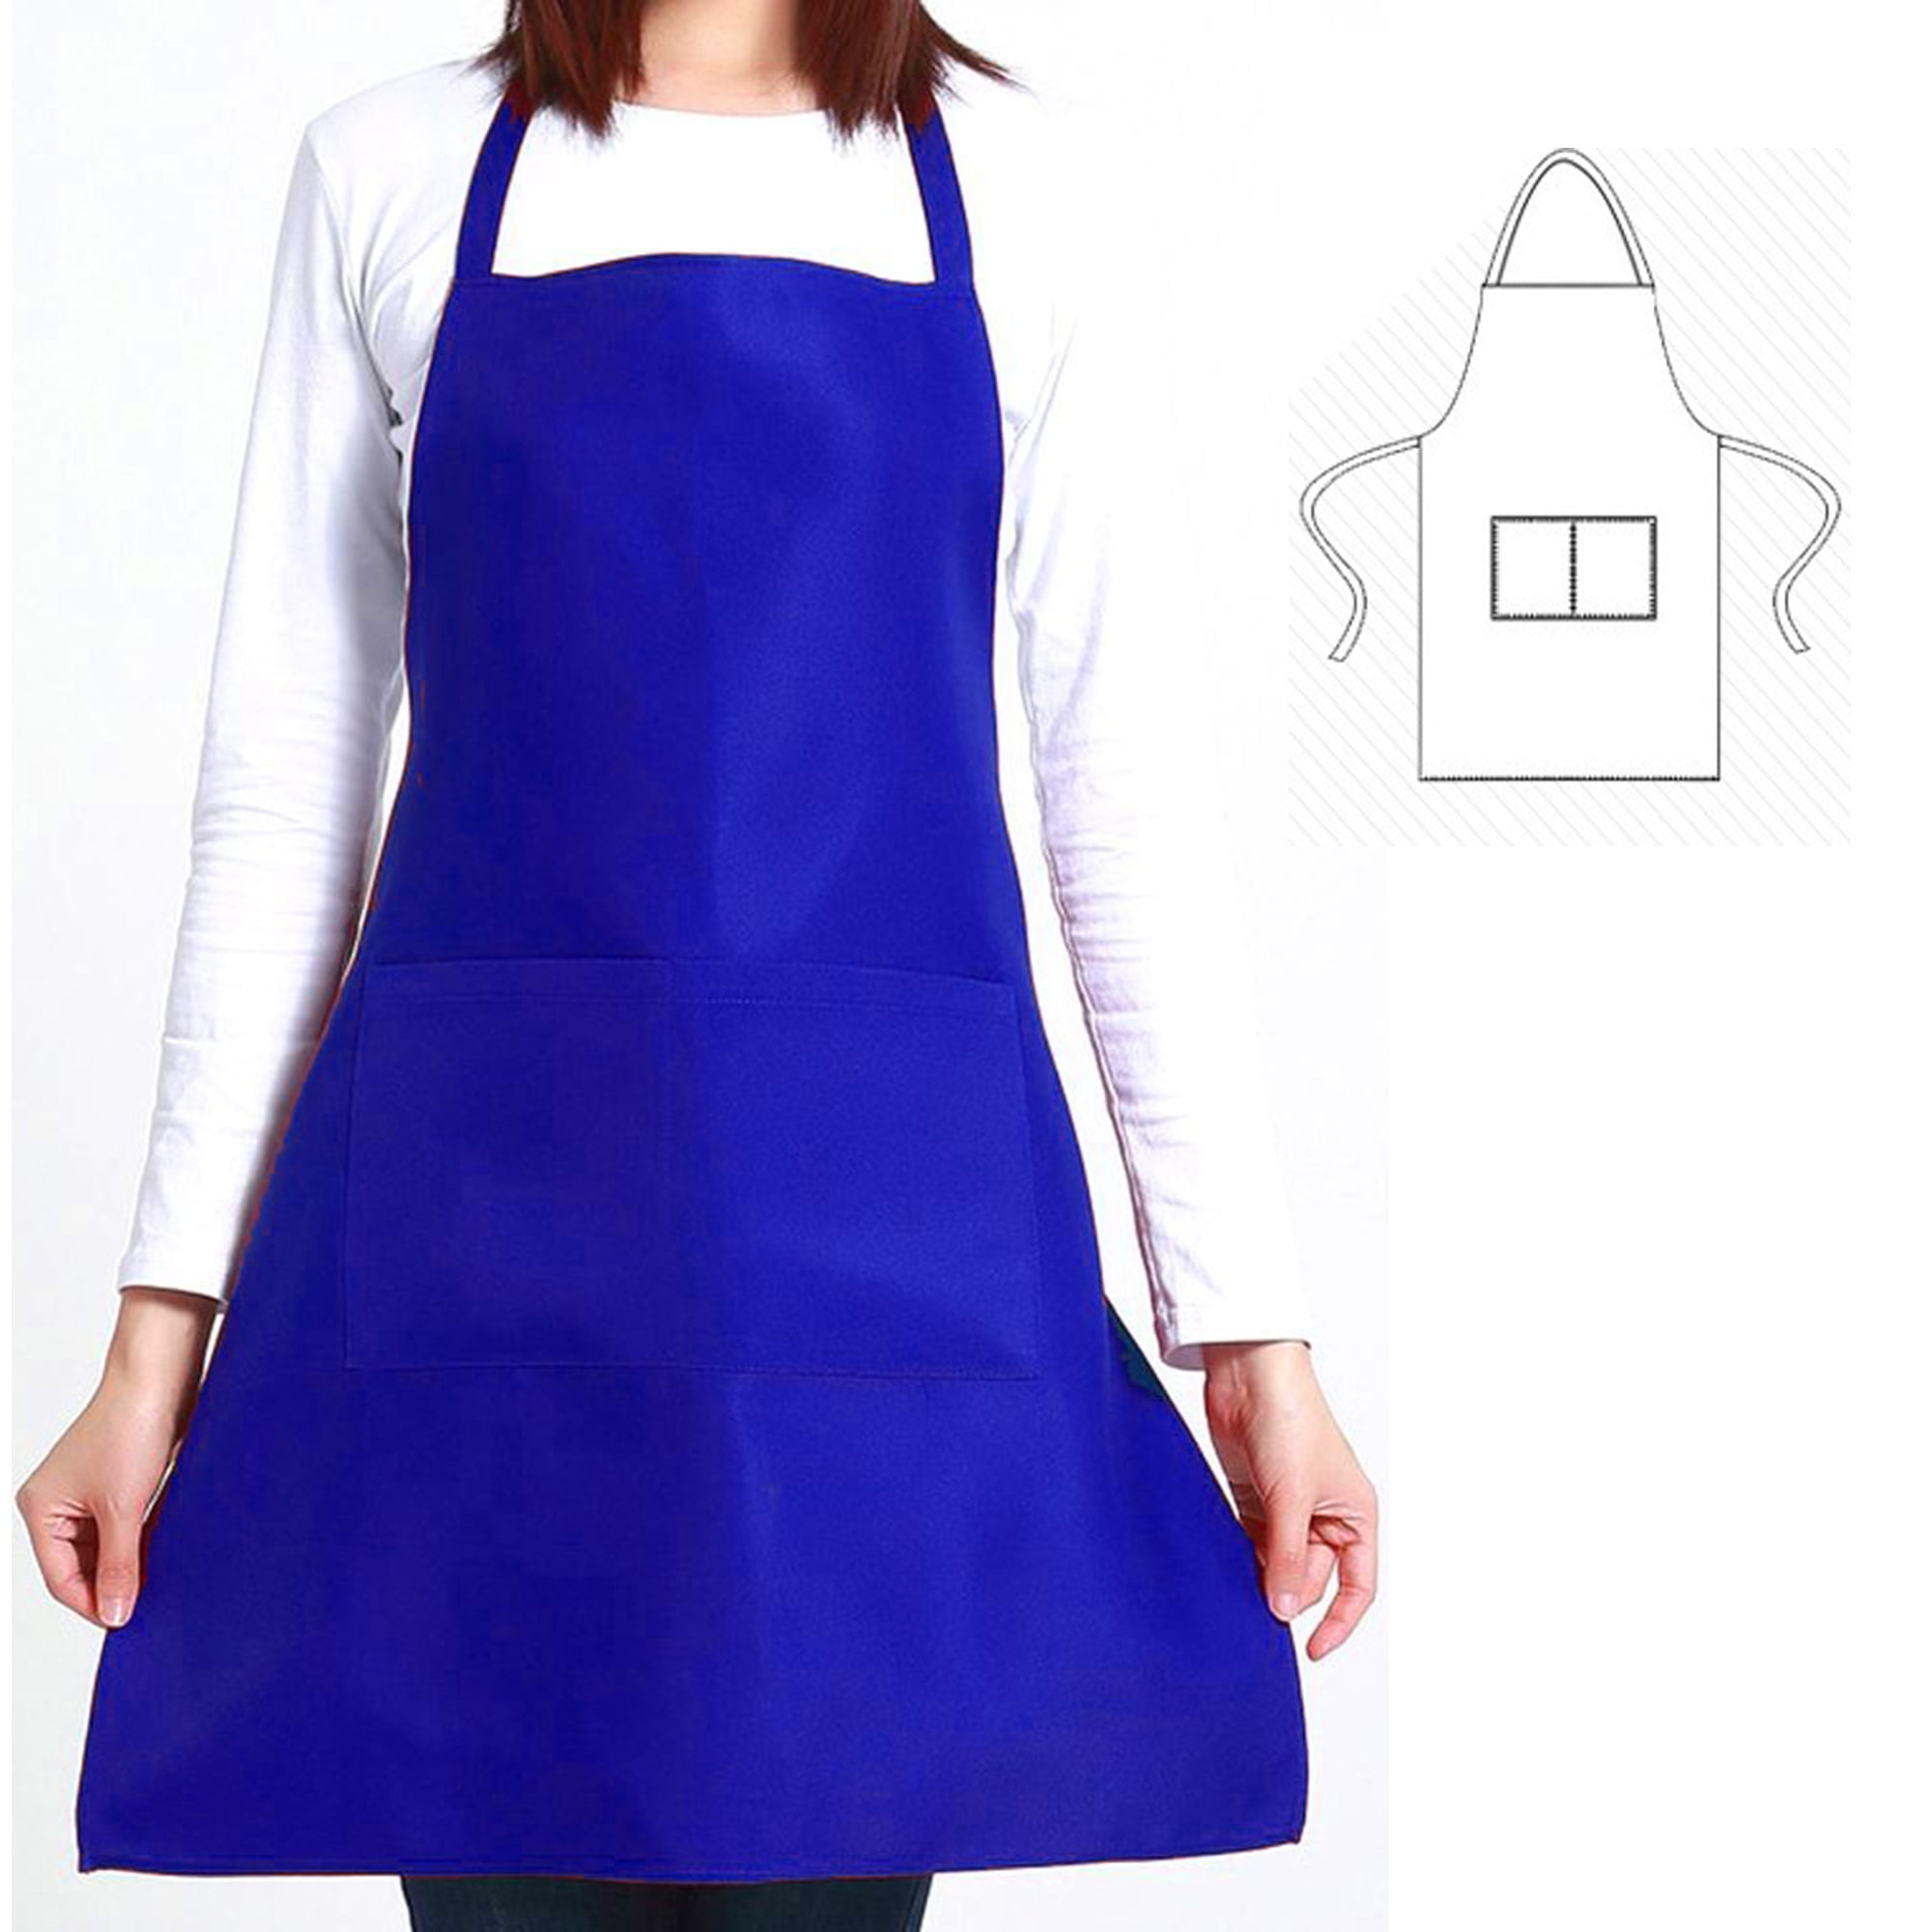 Nk Aprons Easy To Clean Waterproof Male Female Apron Party Picnic Cooking Kitchen Supplies 22 